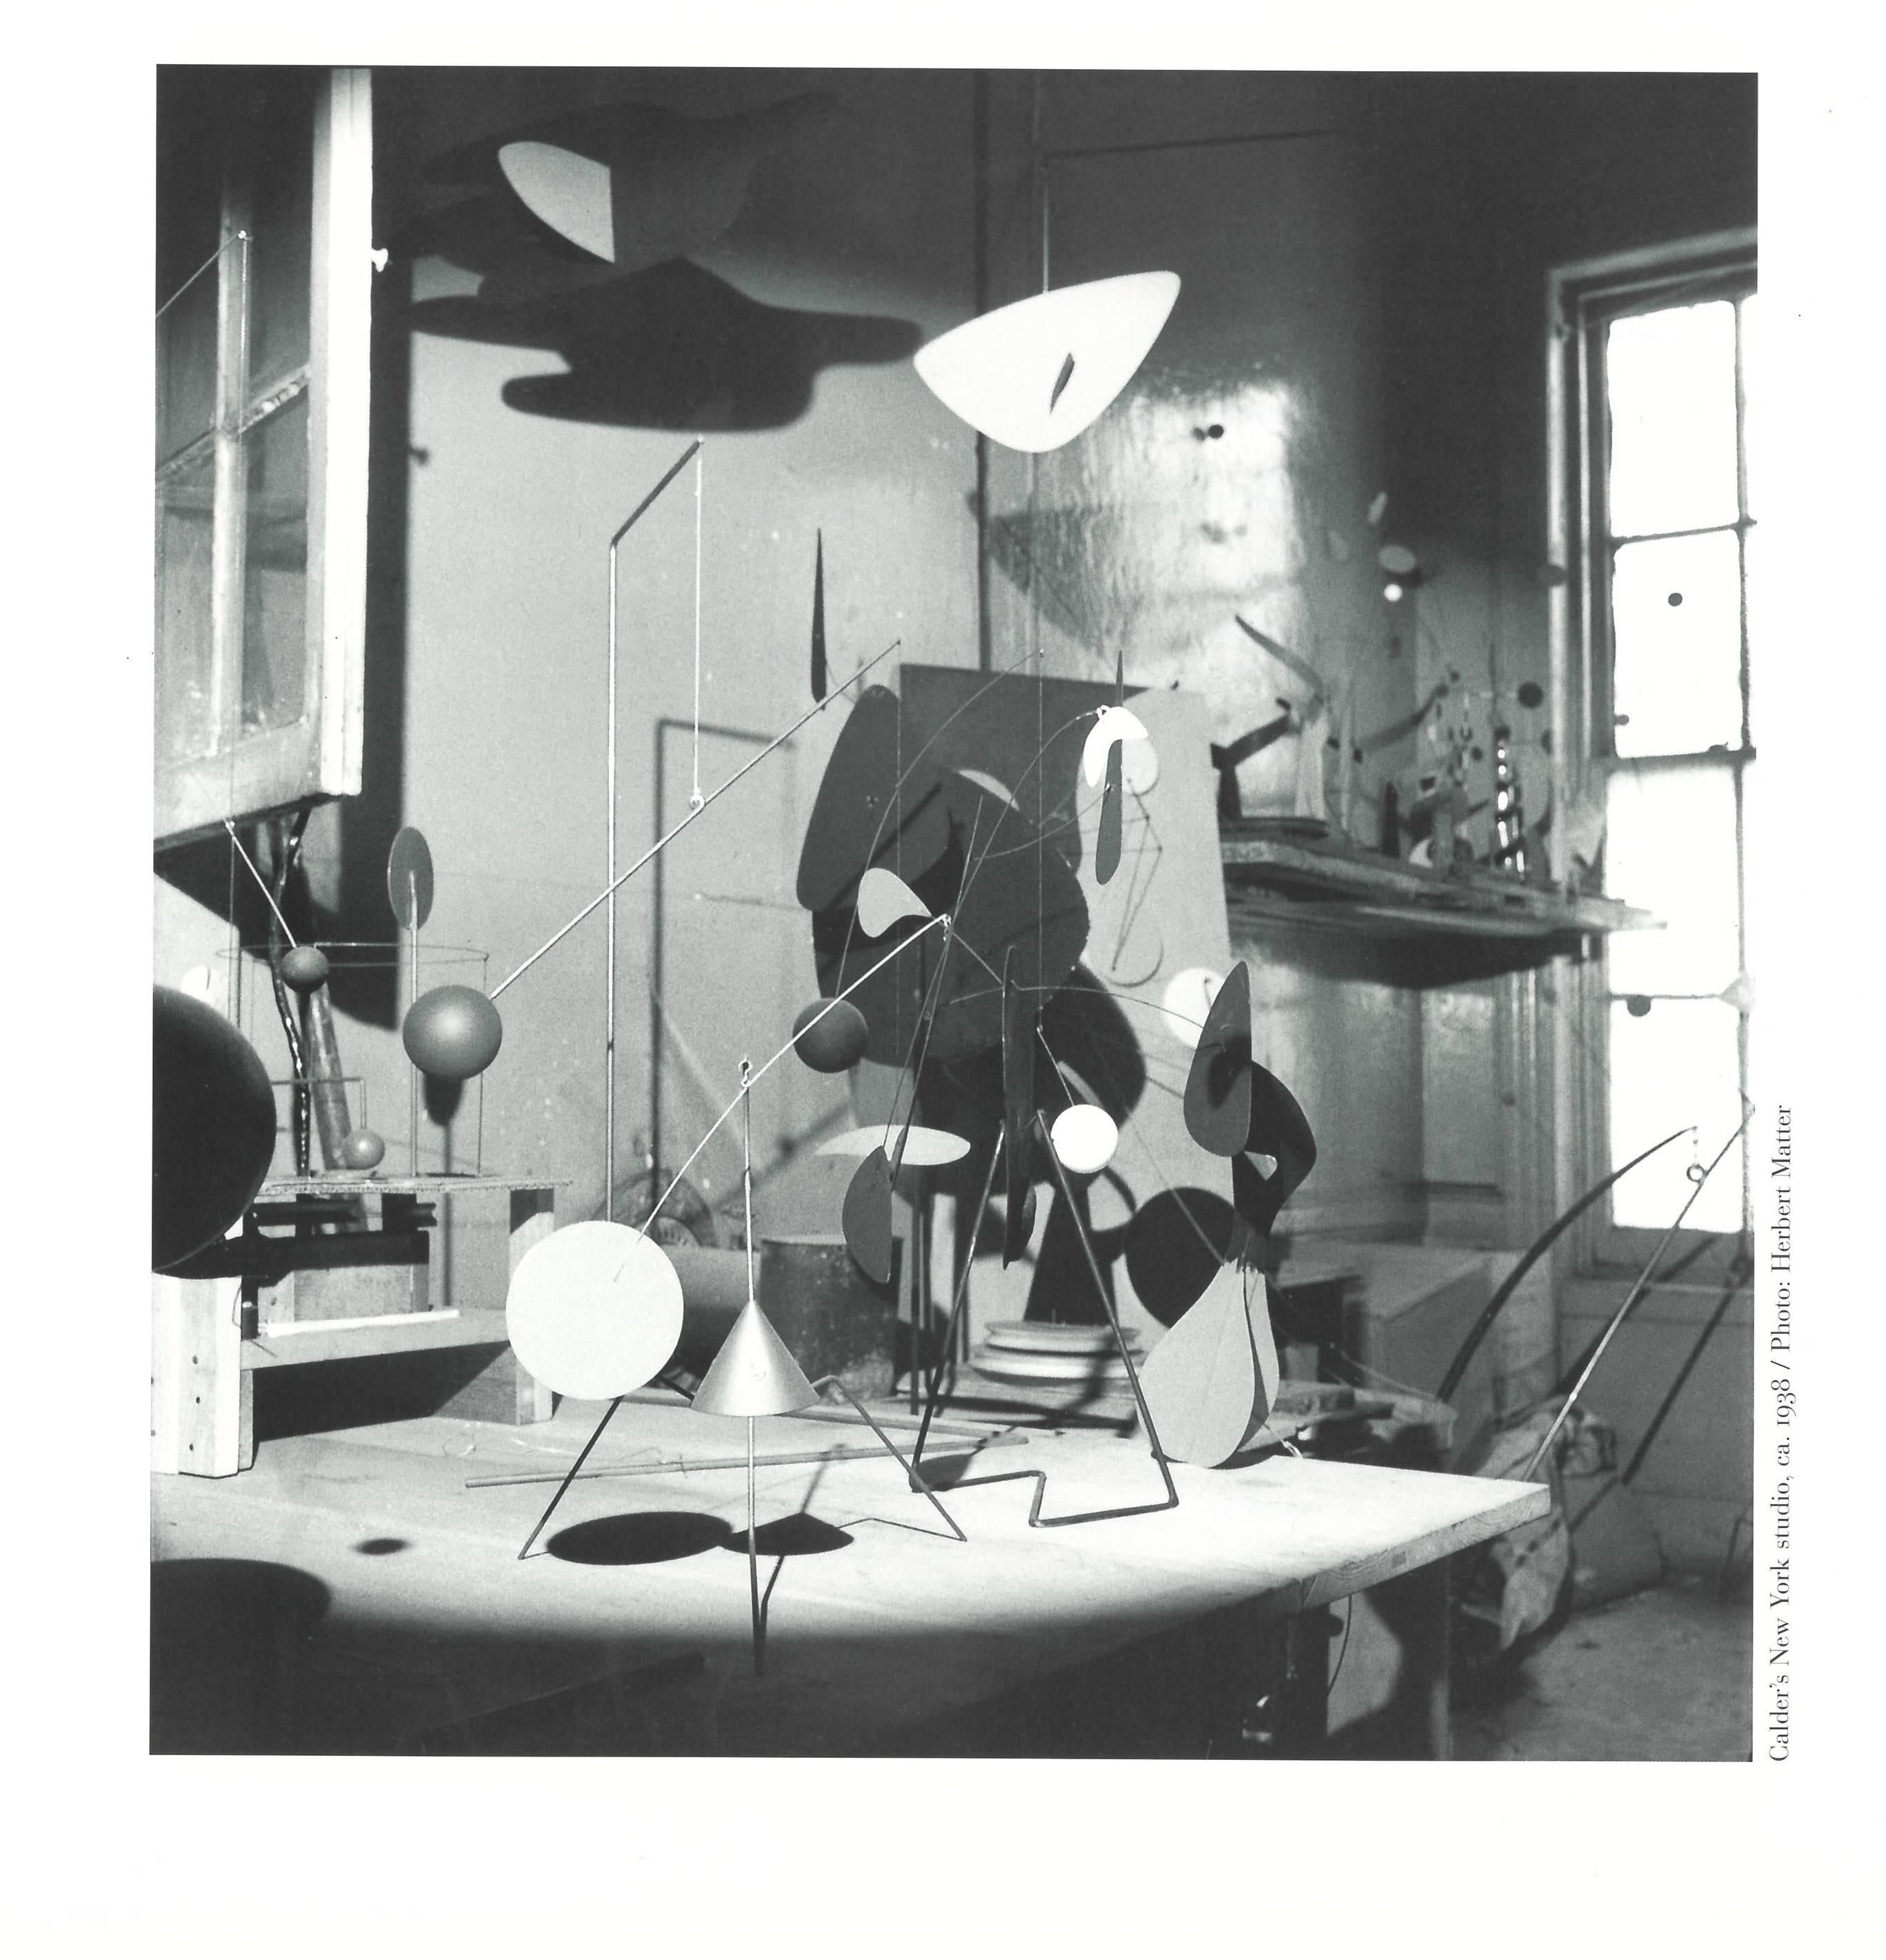 This is a beautifully produced monograph on Alexander Calder was produced to coincide with an exhibition of some of his most famous works. He was one of the greatest sculptors of the 20th century - this book and the exhibition concentrates on his